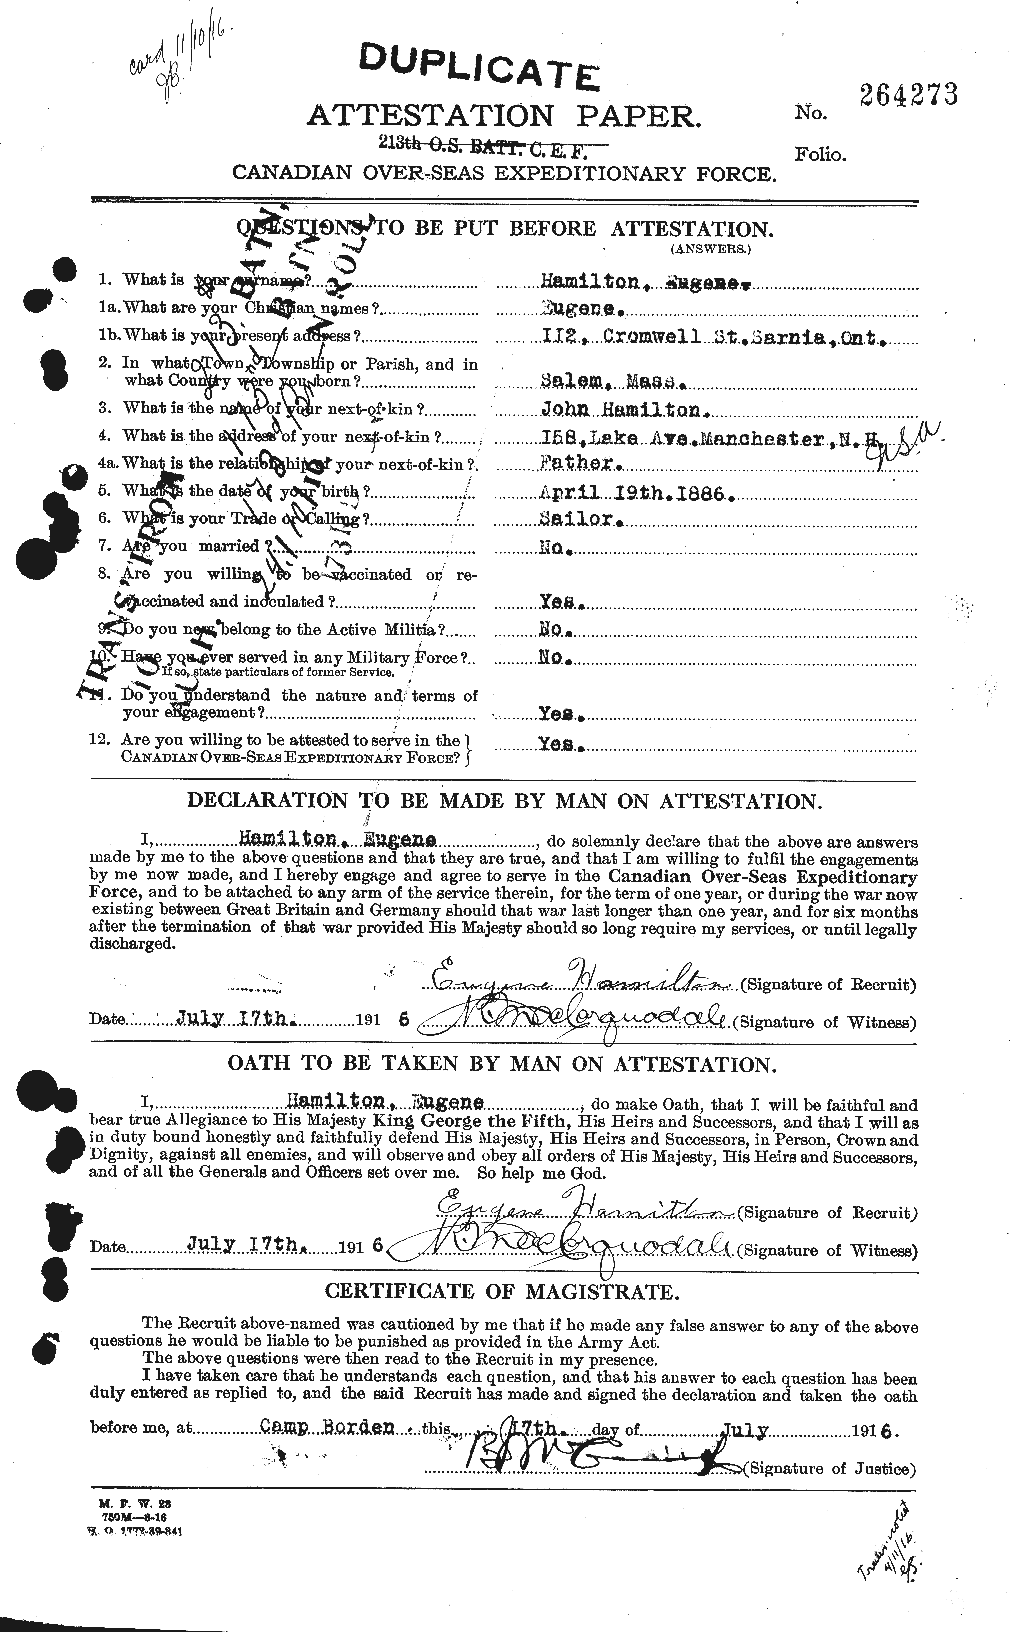 Personnel Records of the First World War - CEF 375393a